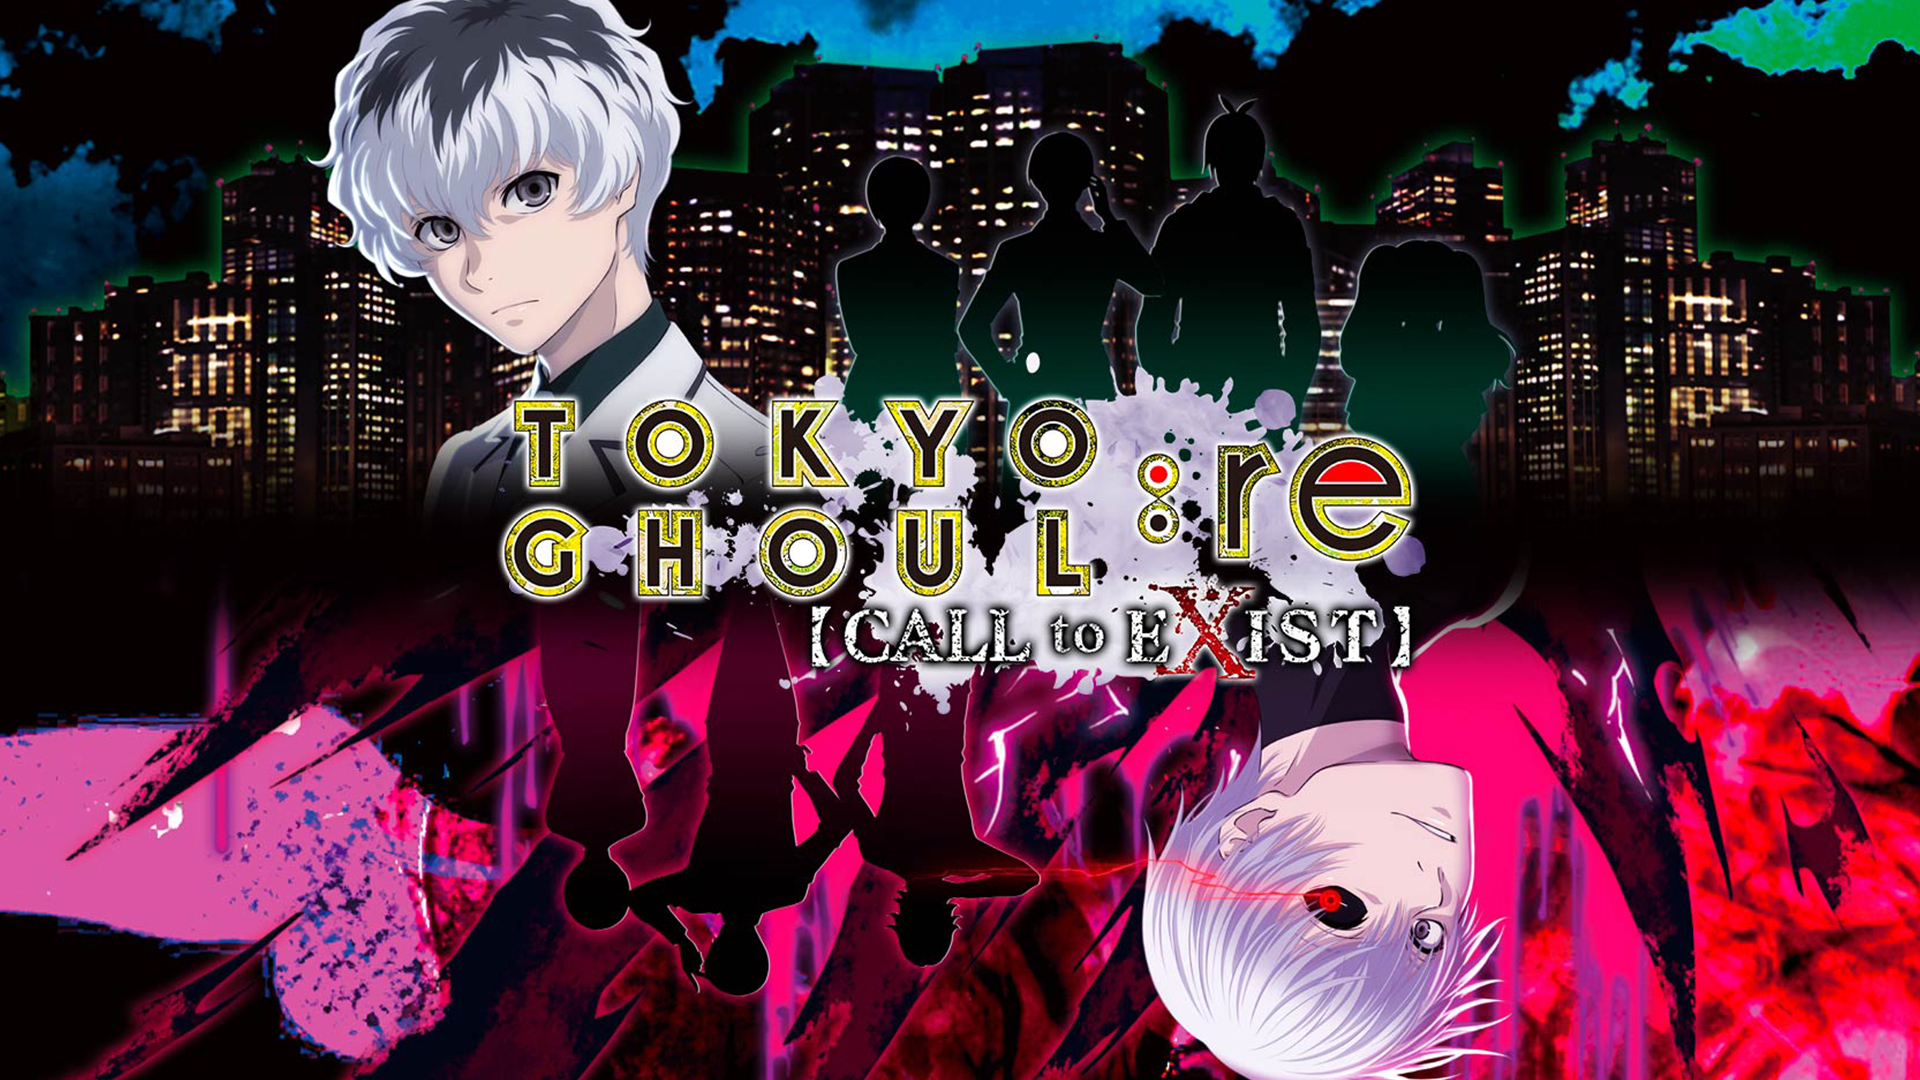 TOKYO GHOUL CALL EXIST